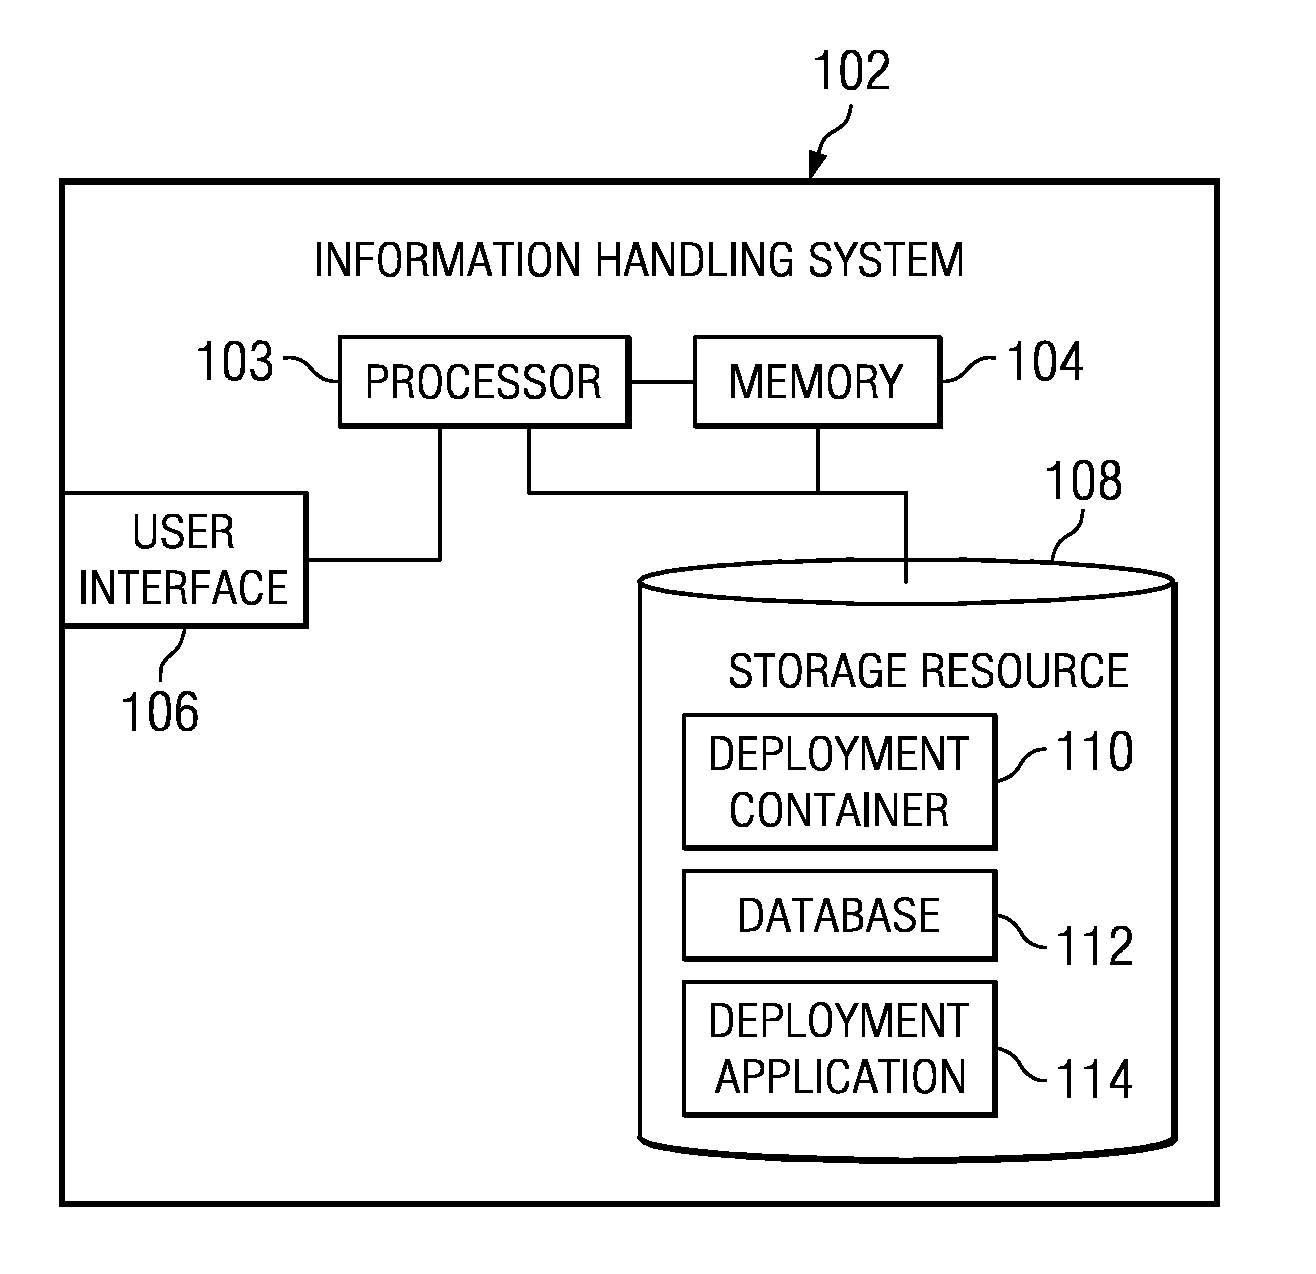 System and Method for Automated Deployment of an Information Handling System